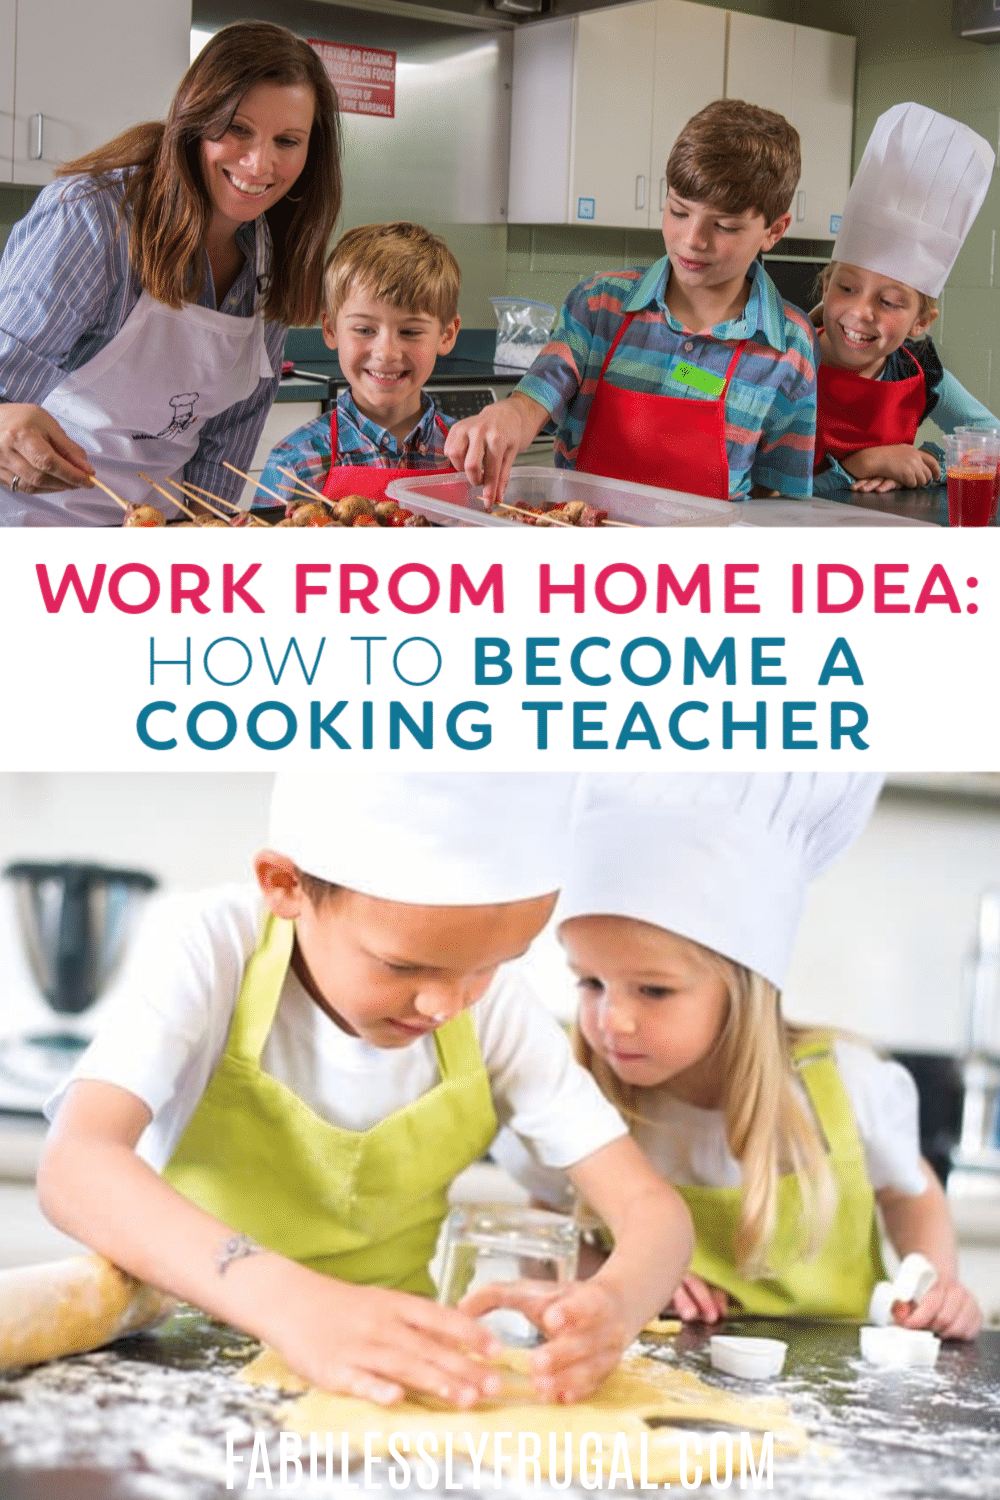 How to become a cooking teacher and make money from home